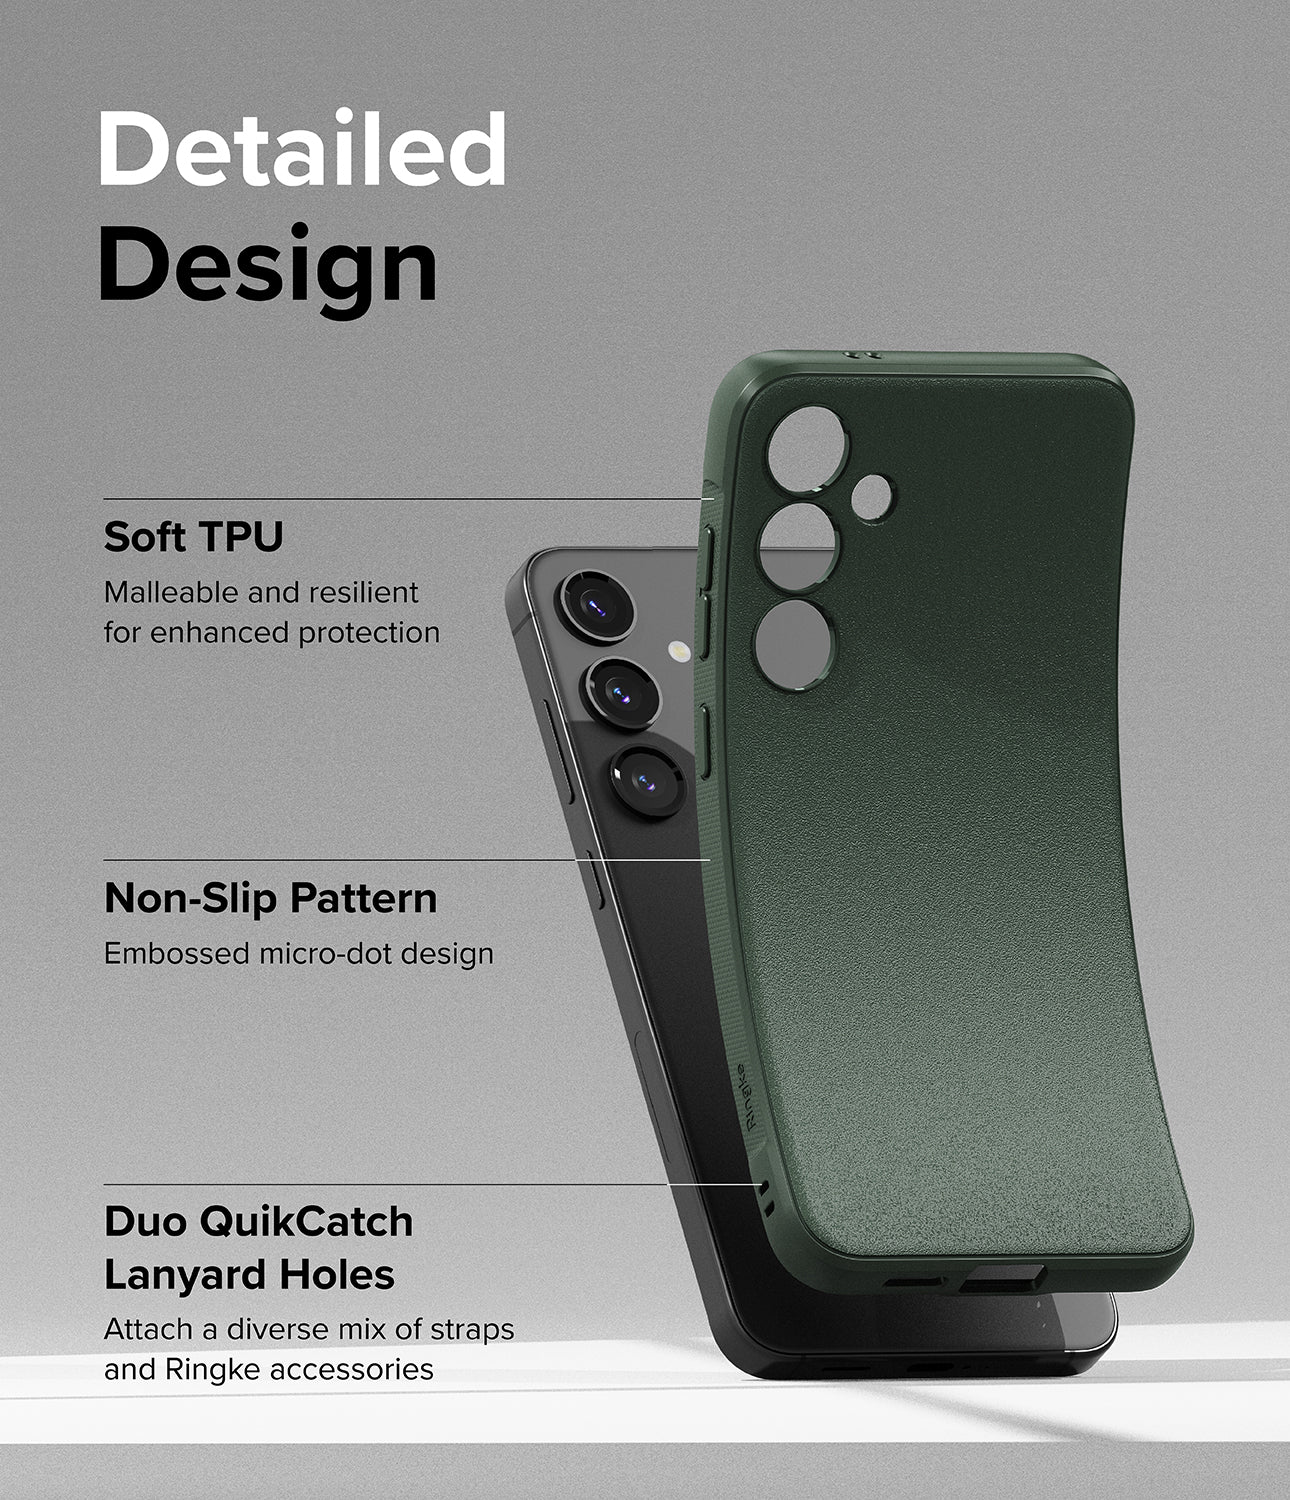 Galaxy S24 Plus Case | Onyx - Dark Green- Detailed Design. Malleable and resilient for enhanced protection with Soft TPU. Embossed micro-dot design with Non-Slip Pattern. Attach a diverse mix of straps and Ringke accessories with Duo QuikCatch Lanyard Holes.